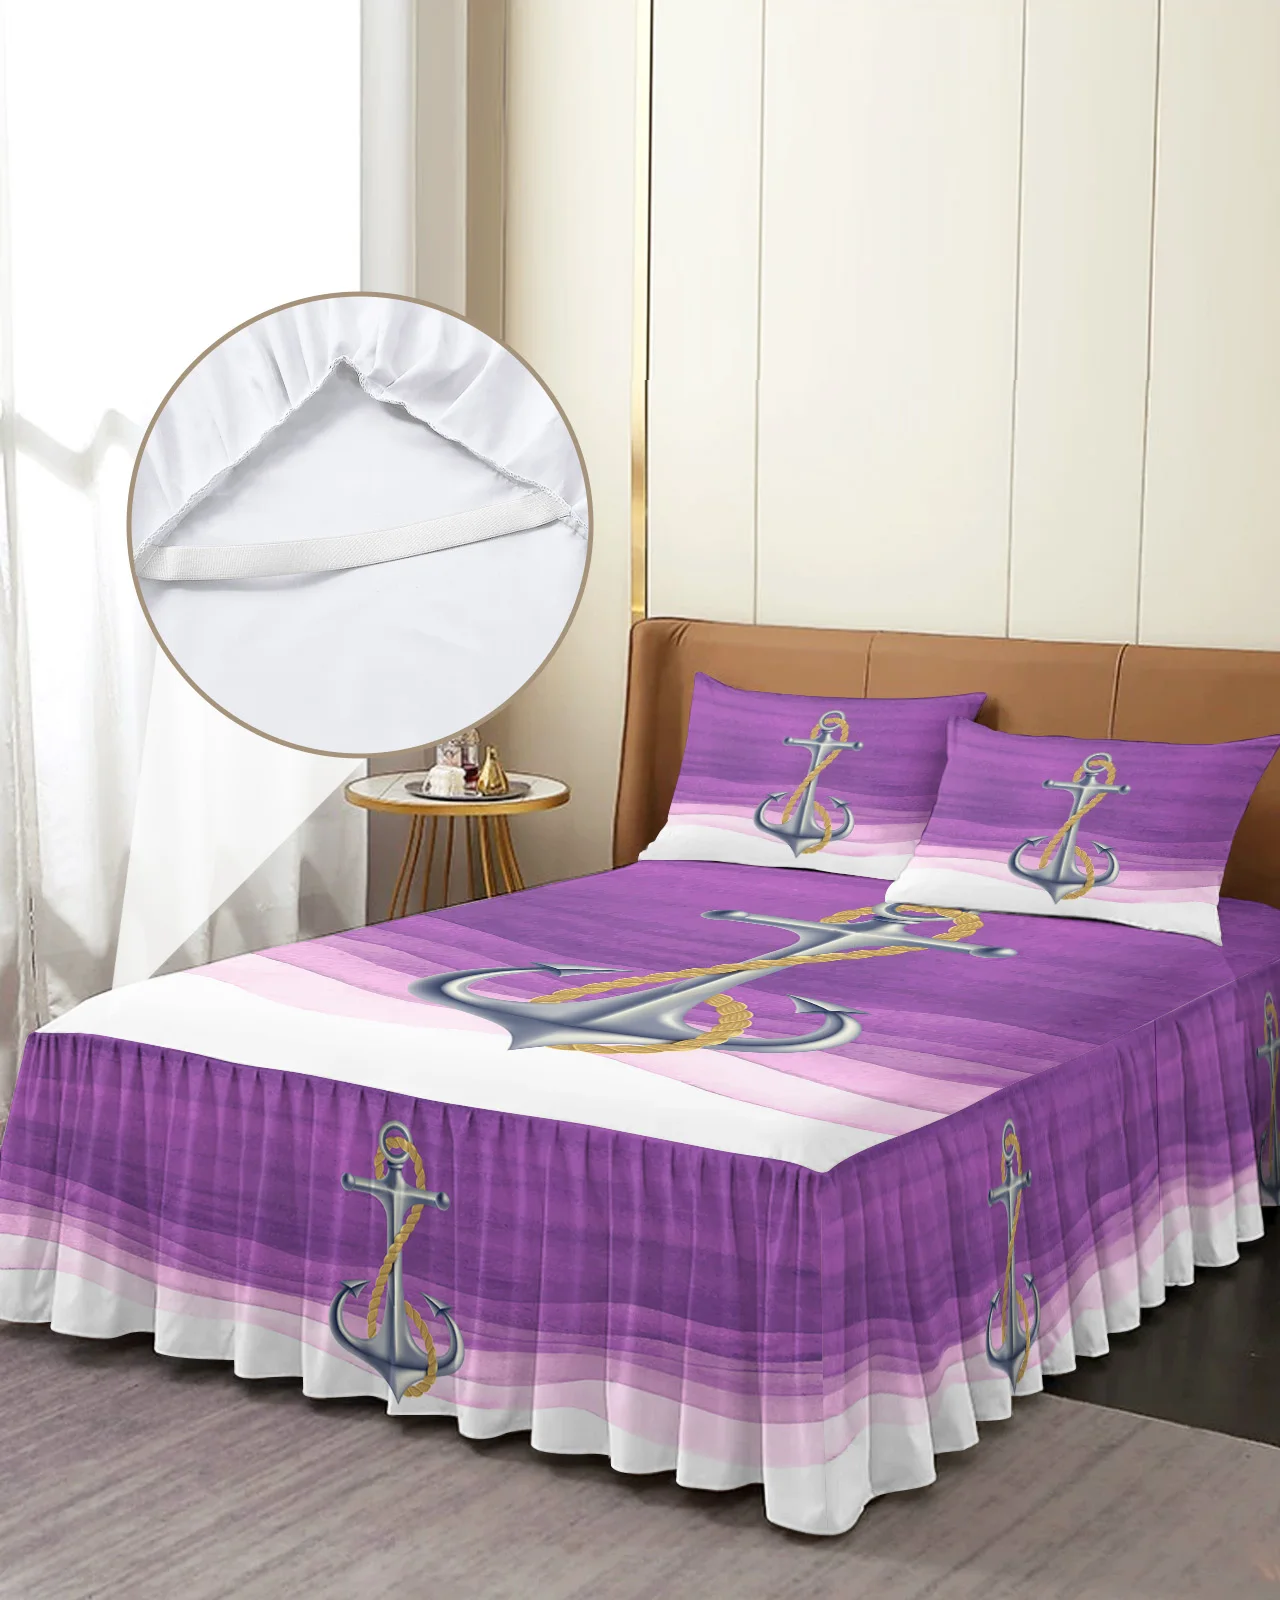 

Ocean Gradient Anchor Purple Bed Skirt Elastic Fitted Bedspread With Pillowcases Mattress Cover Bedding Set Bed Sheet